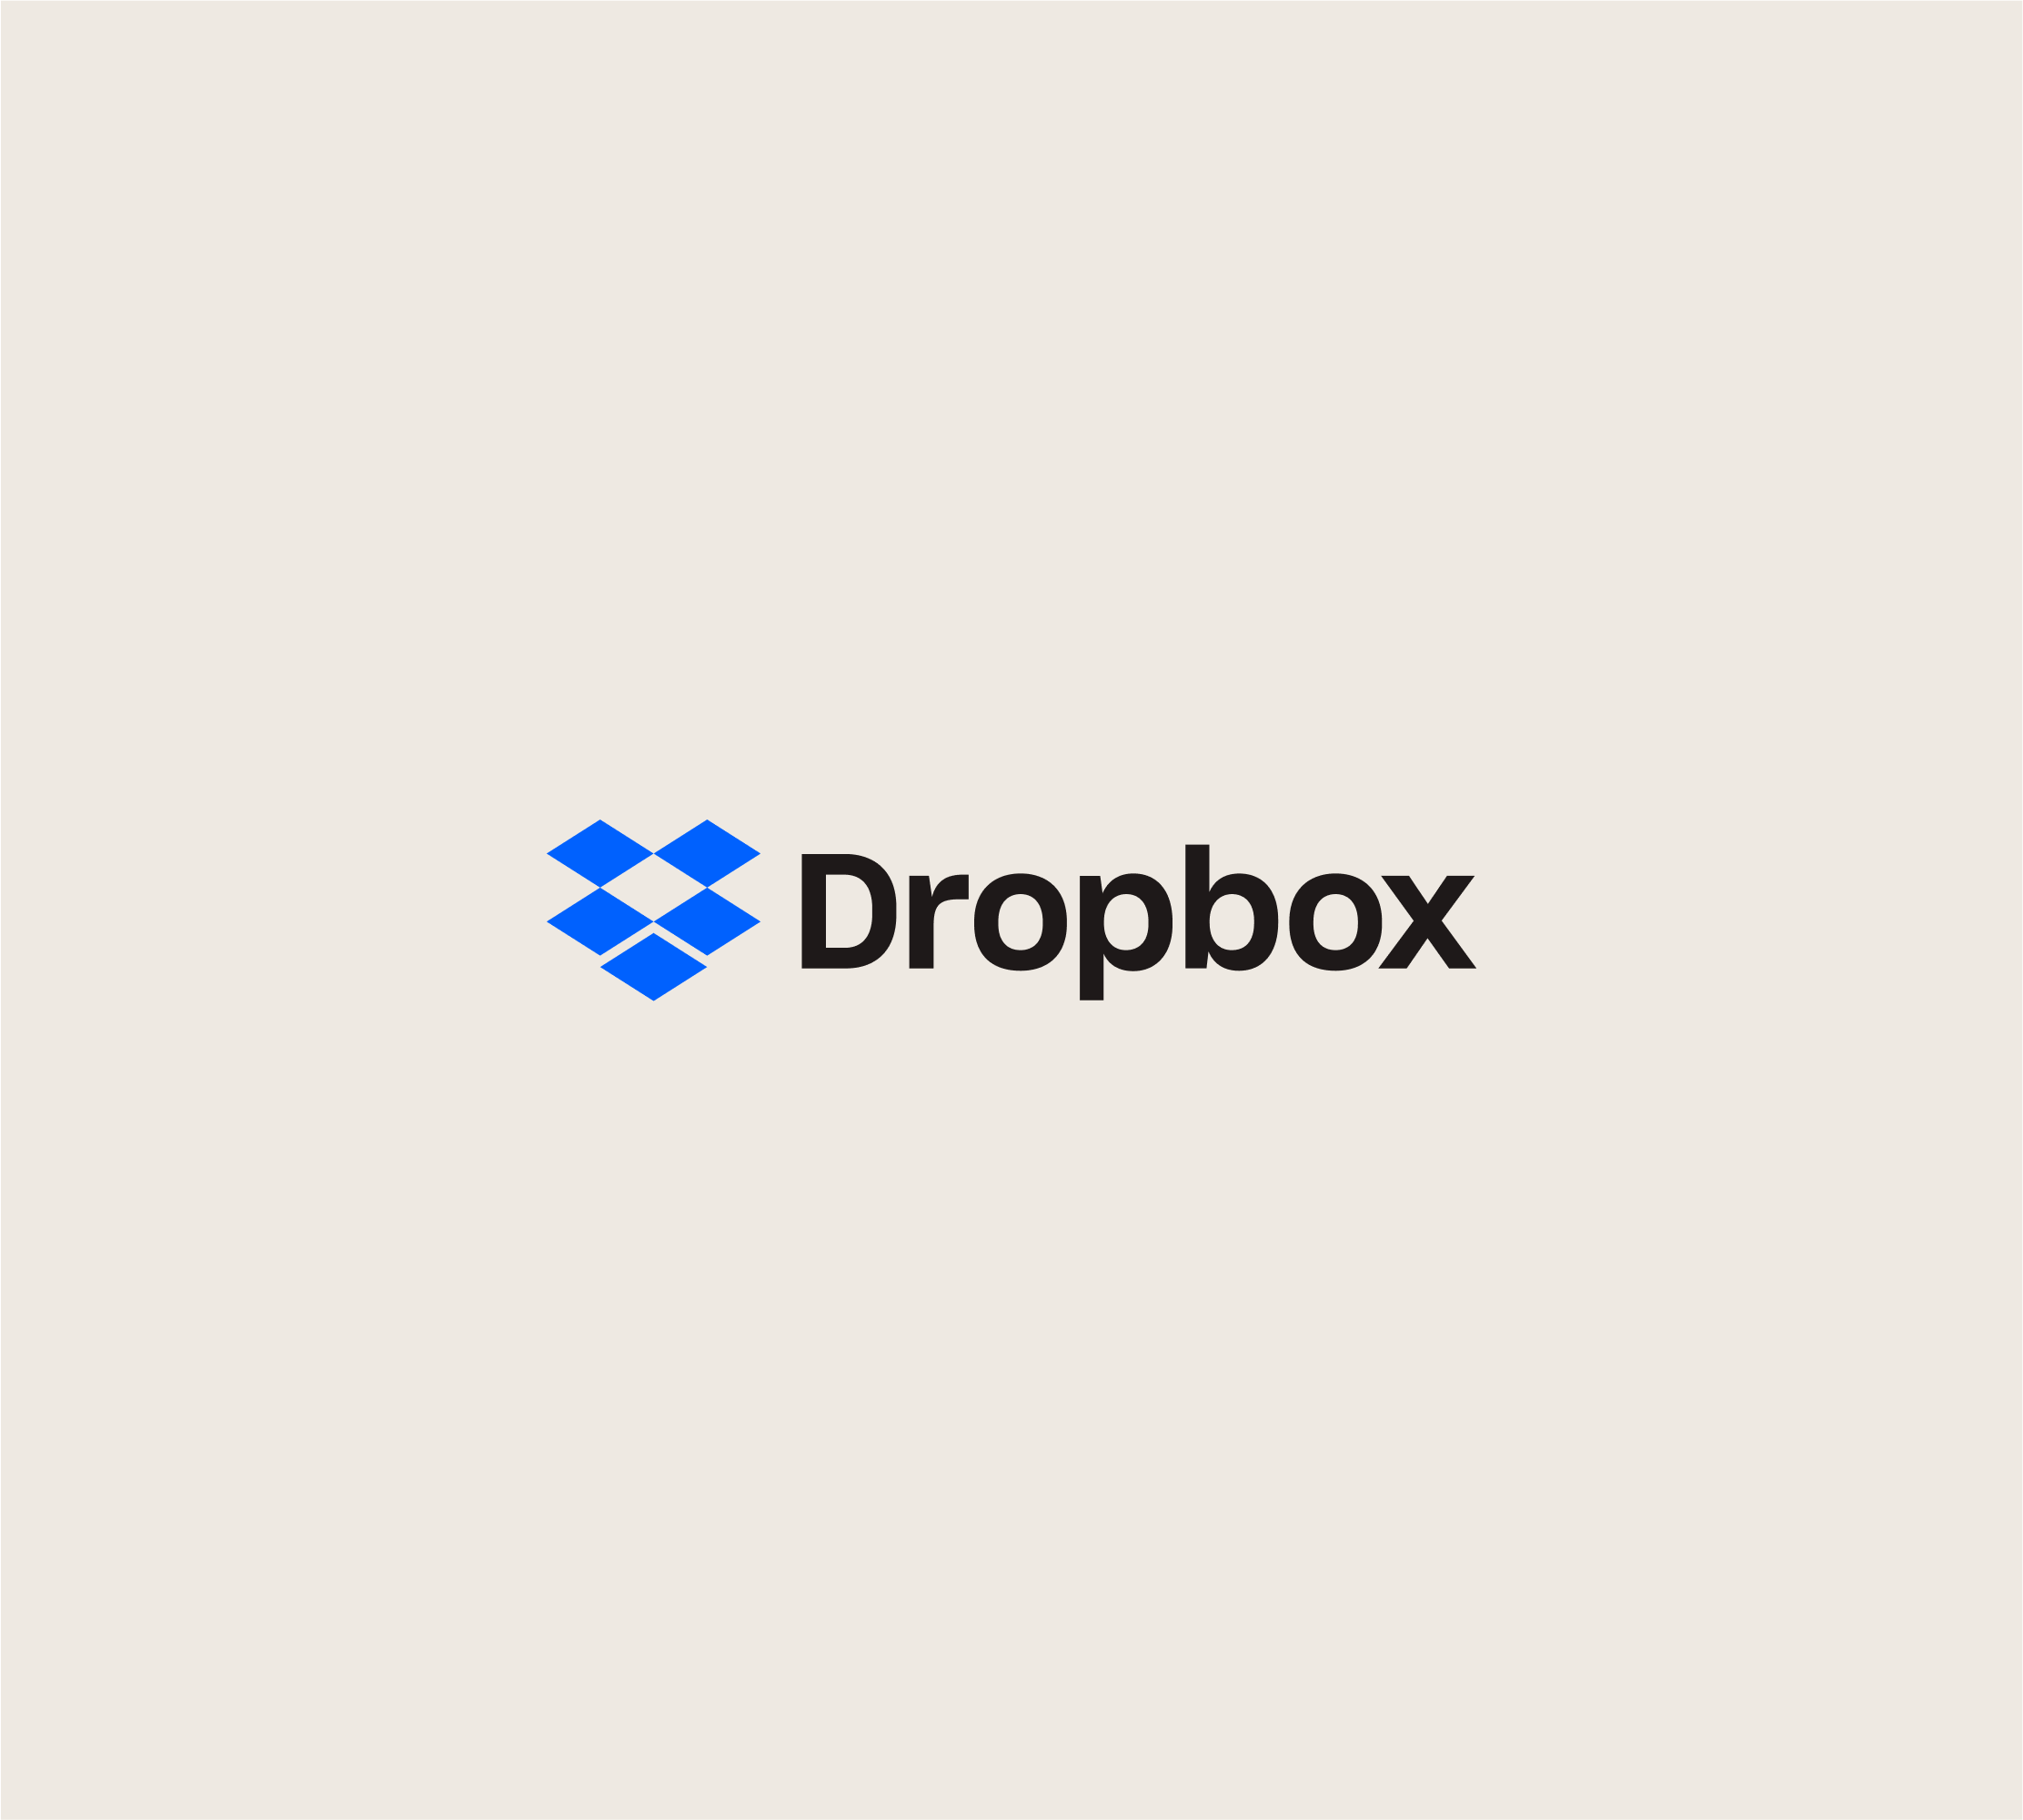 Sync with Dropbox